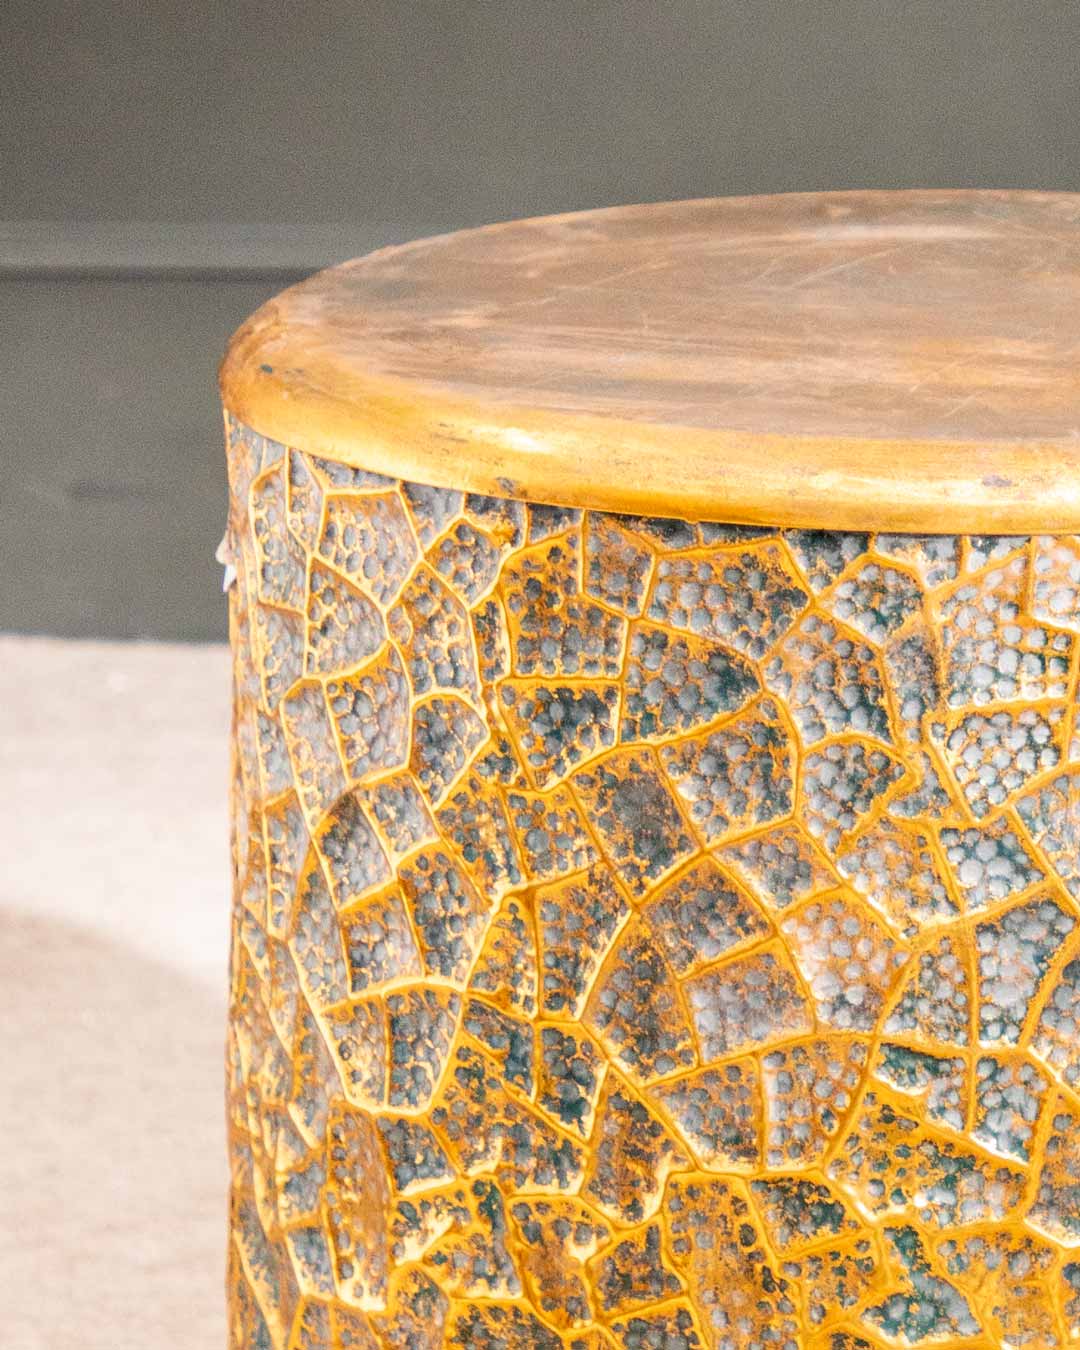 'Lacework Dreams' Nesting End Table - Large